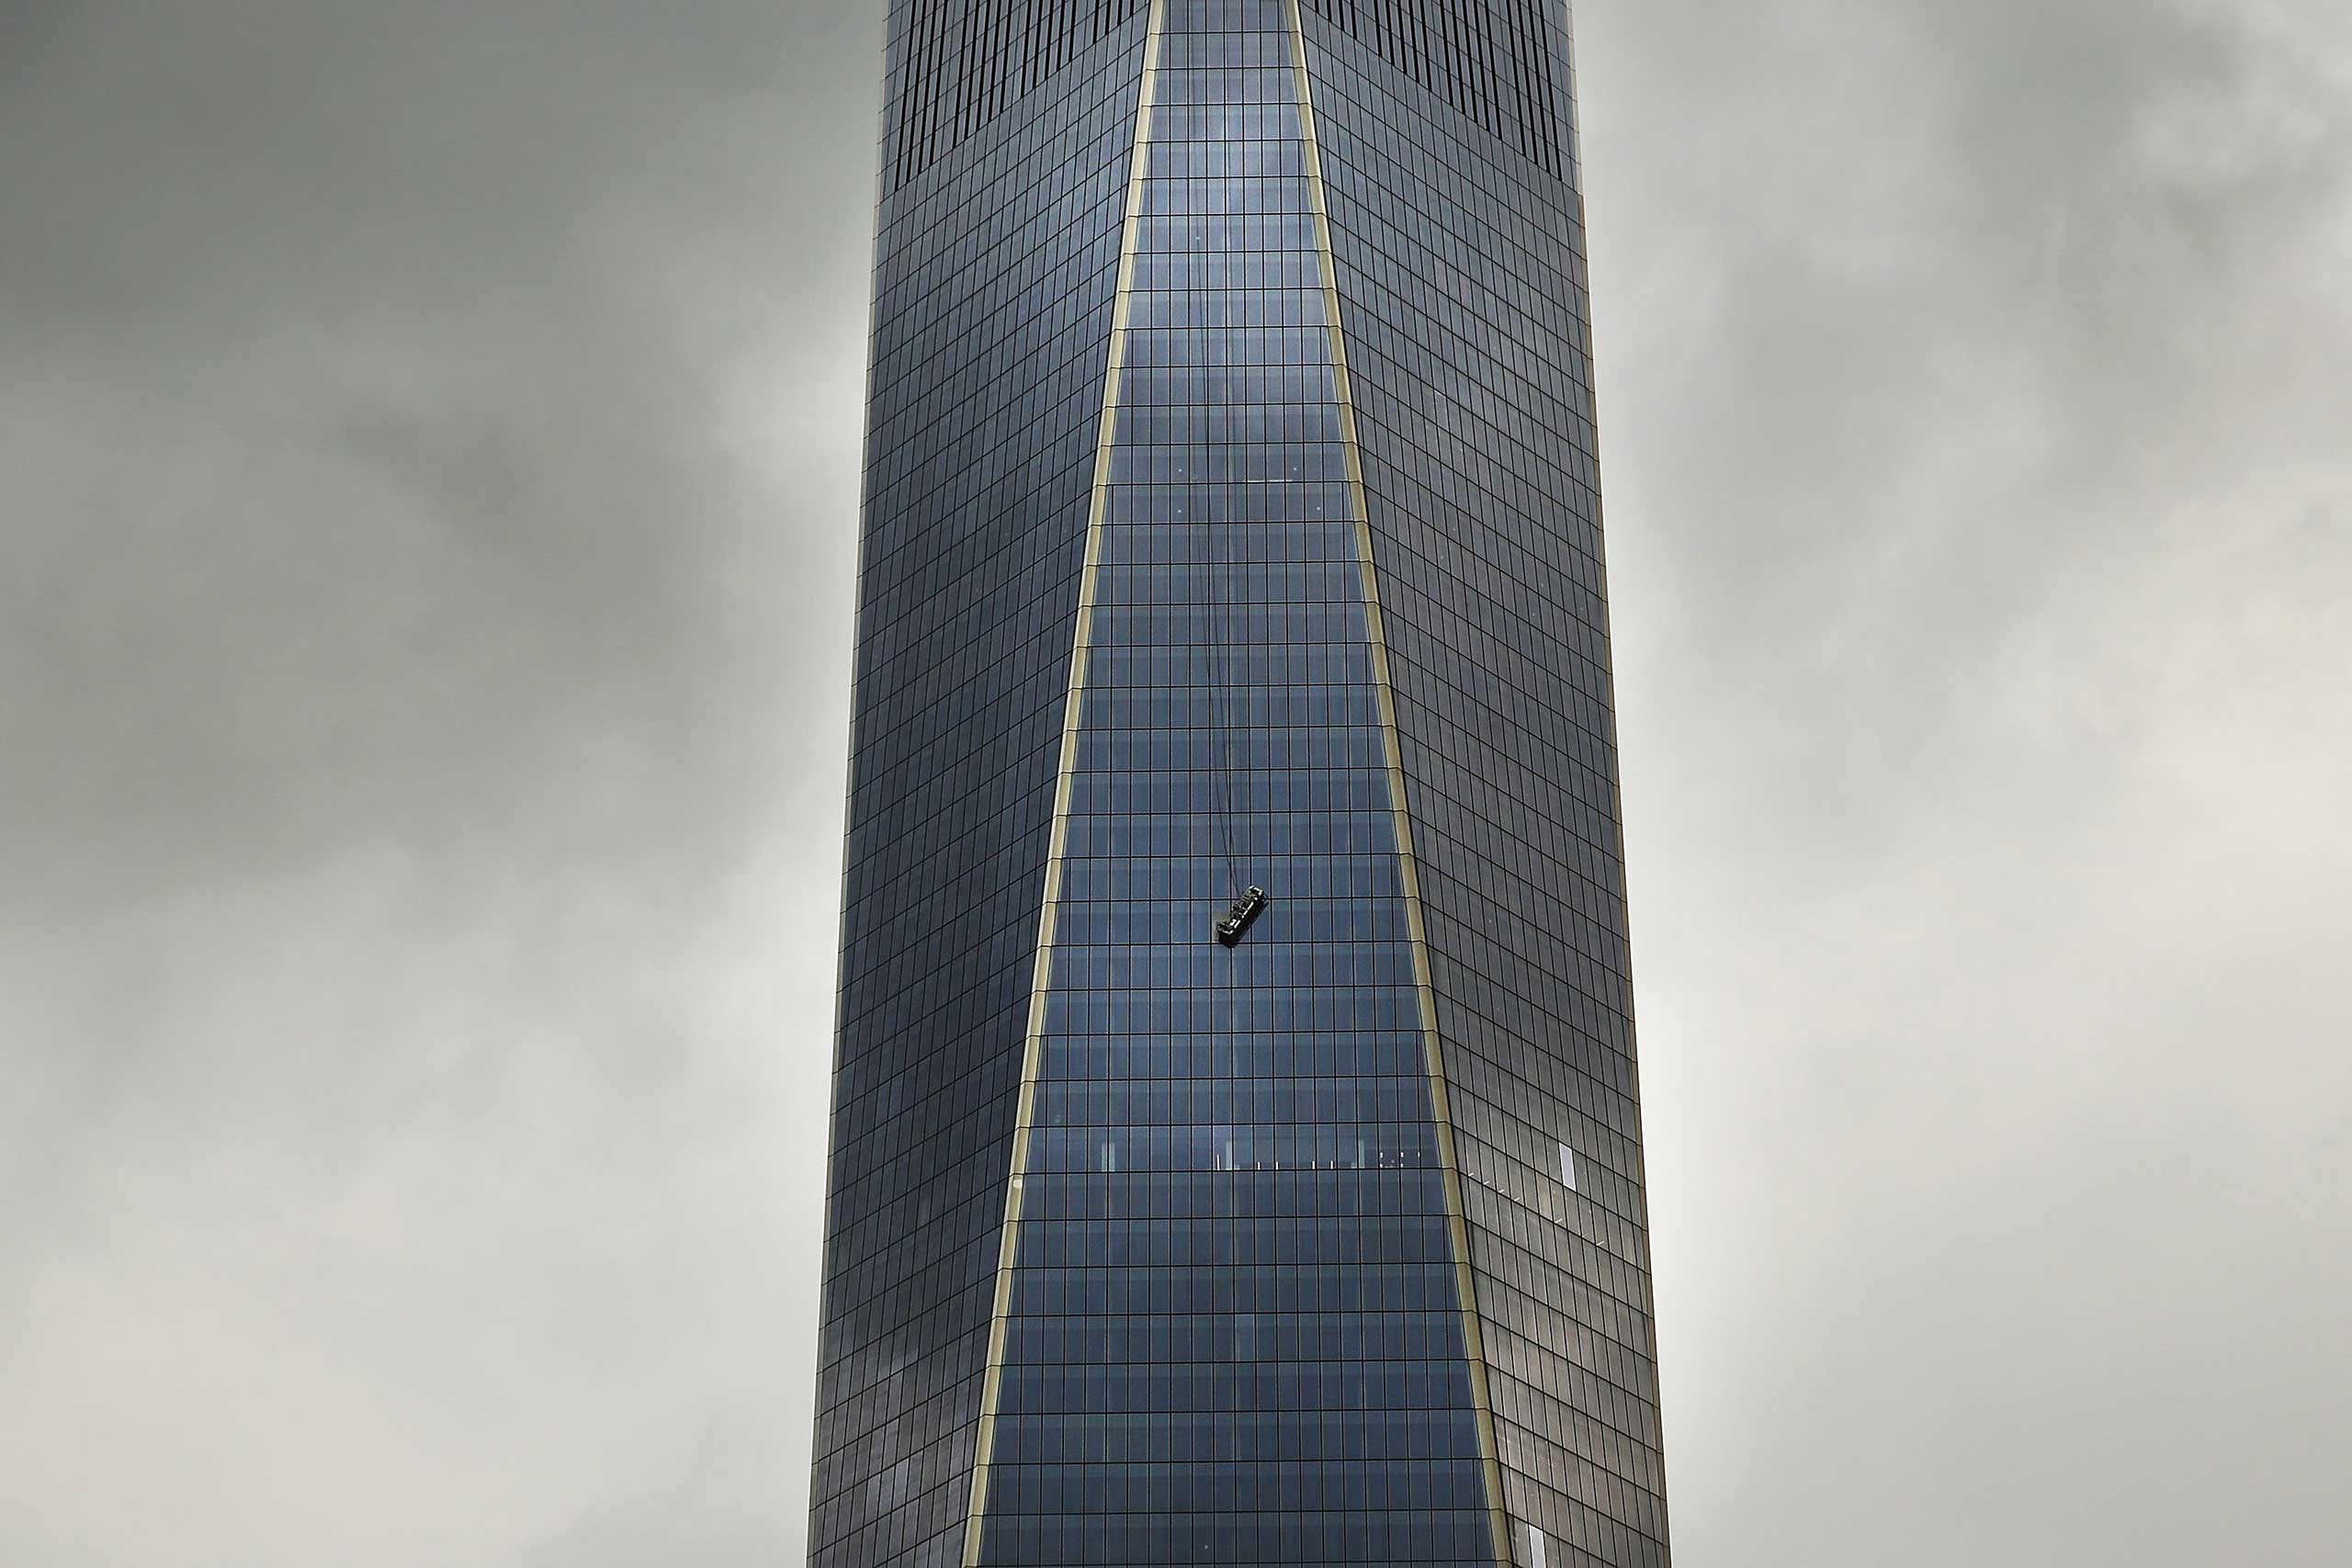 Nov. 12, 2014. A scaffold carrying two workers hangs 69 floors up at One World Trade Center in New York City. The workers were washing windows 69 floors up.